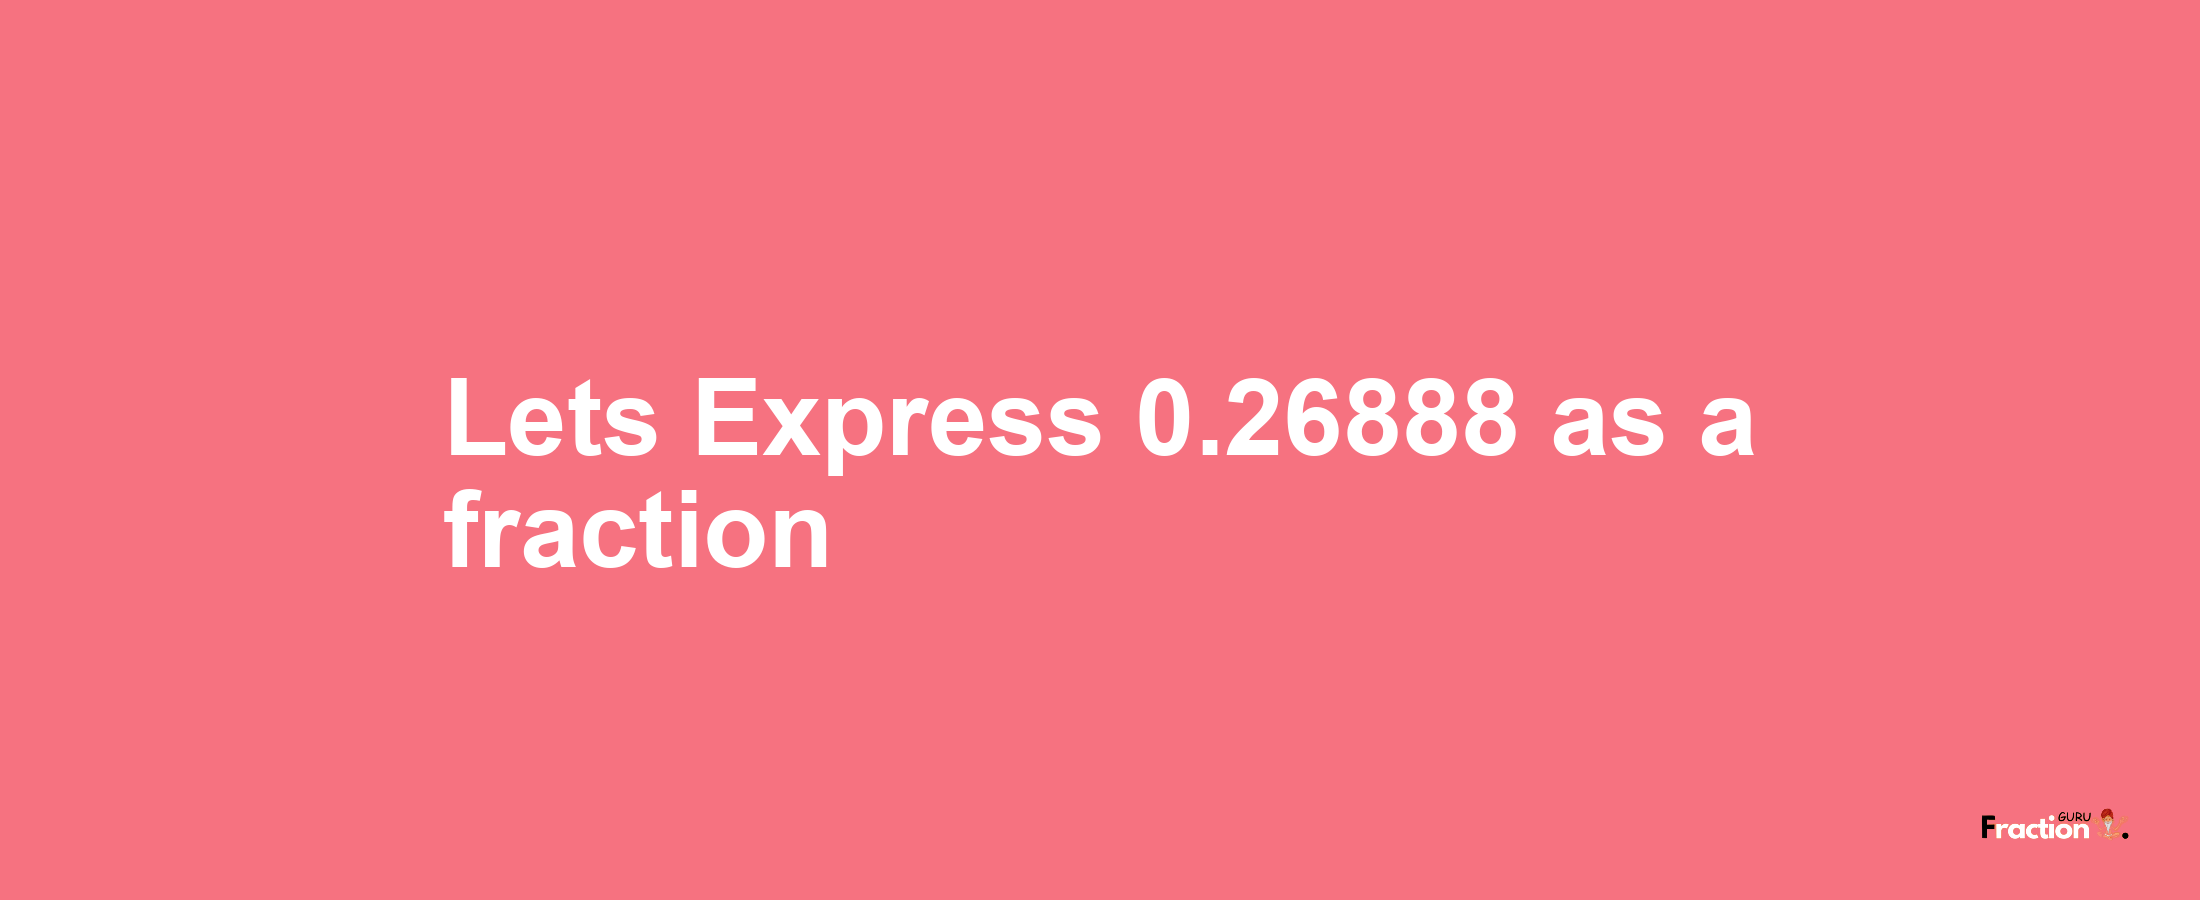 Lets Express 0.26888 as afraction